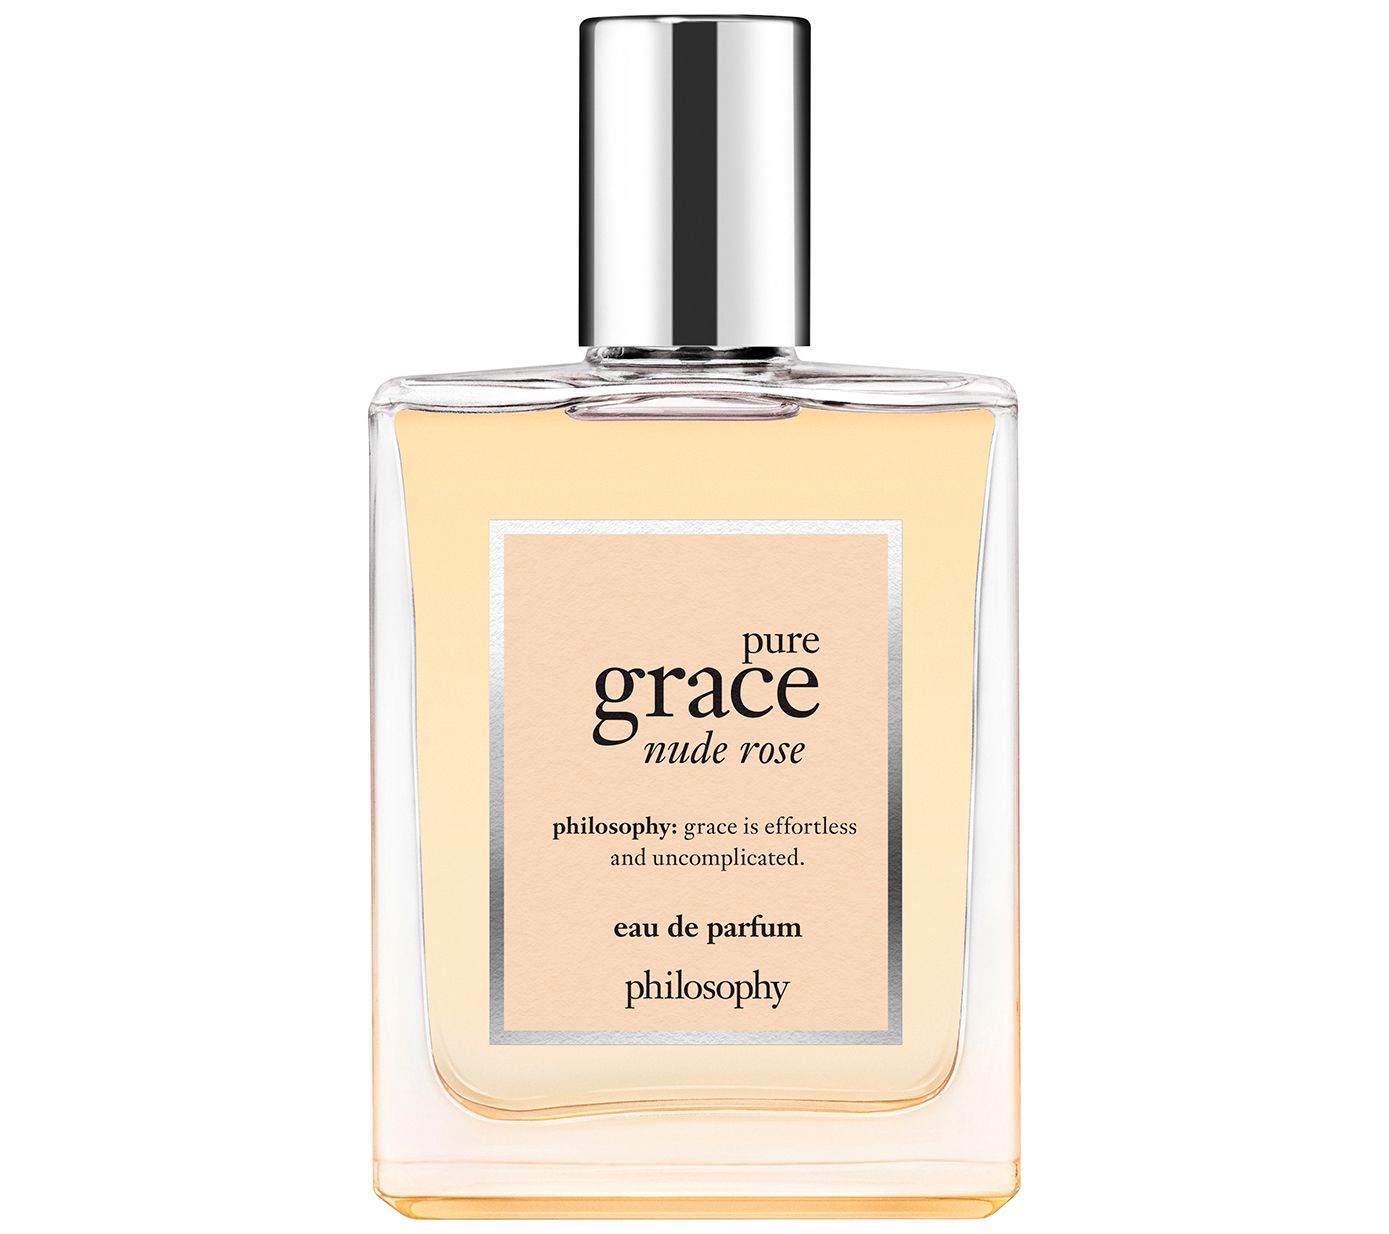 Try These 5 Gender-Neutral Fragrances Today - The Garnette Report